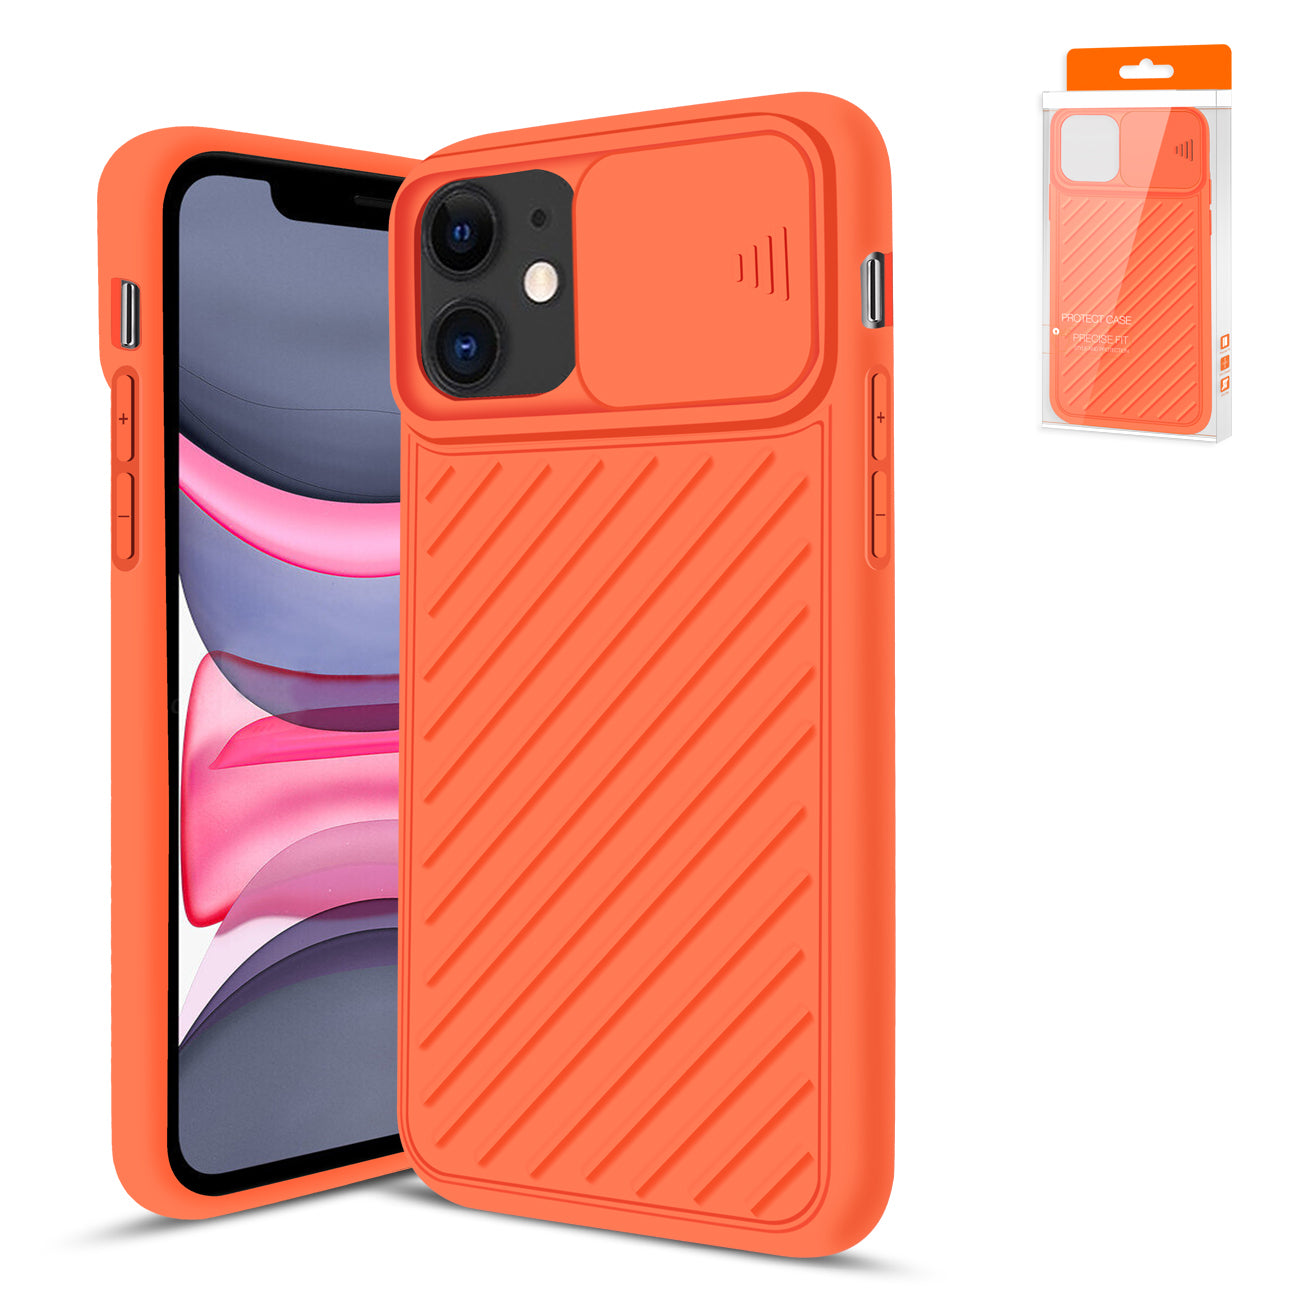 Reiko CamShield Series Case with Slide Camera Cover Slim Stylish Protective tpu case for IPhone 11